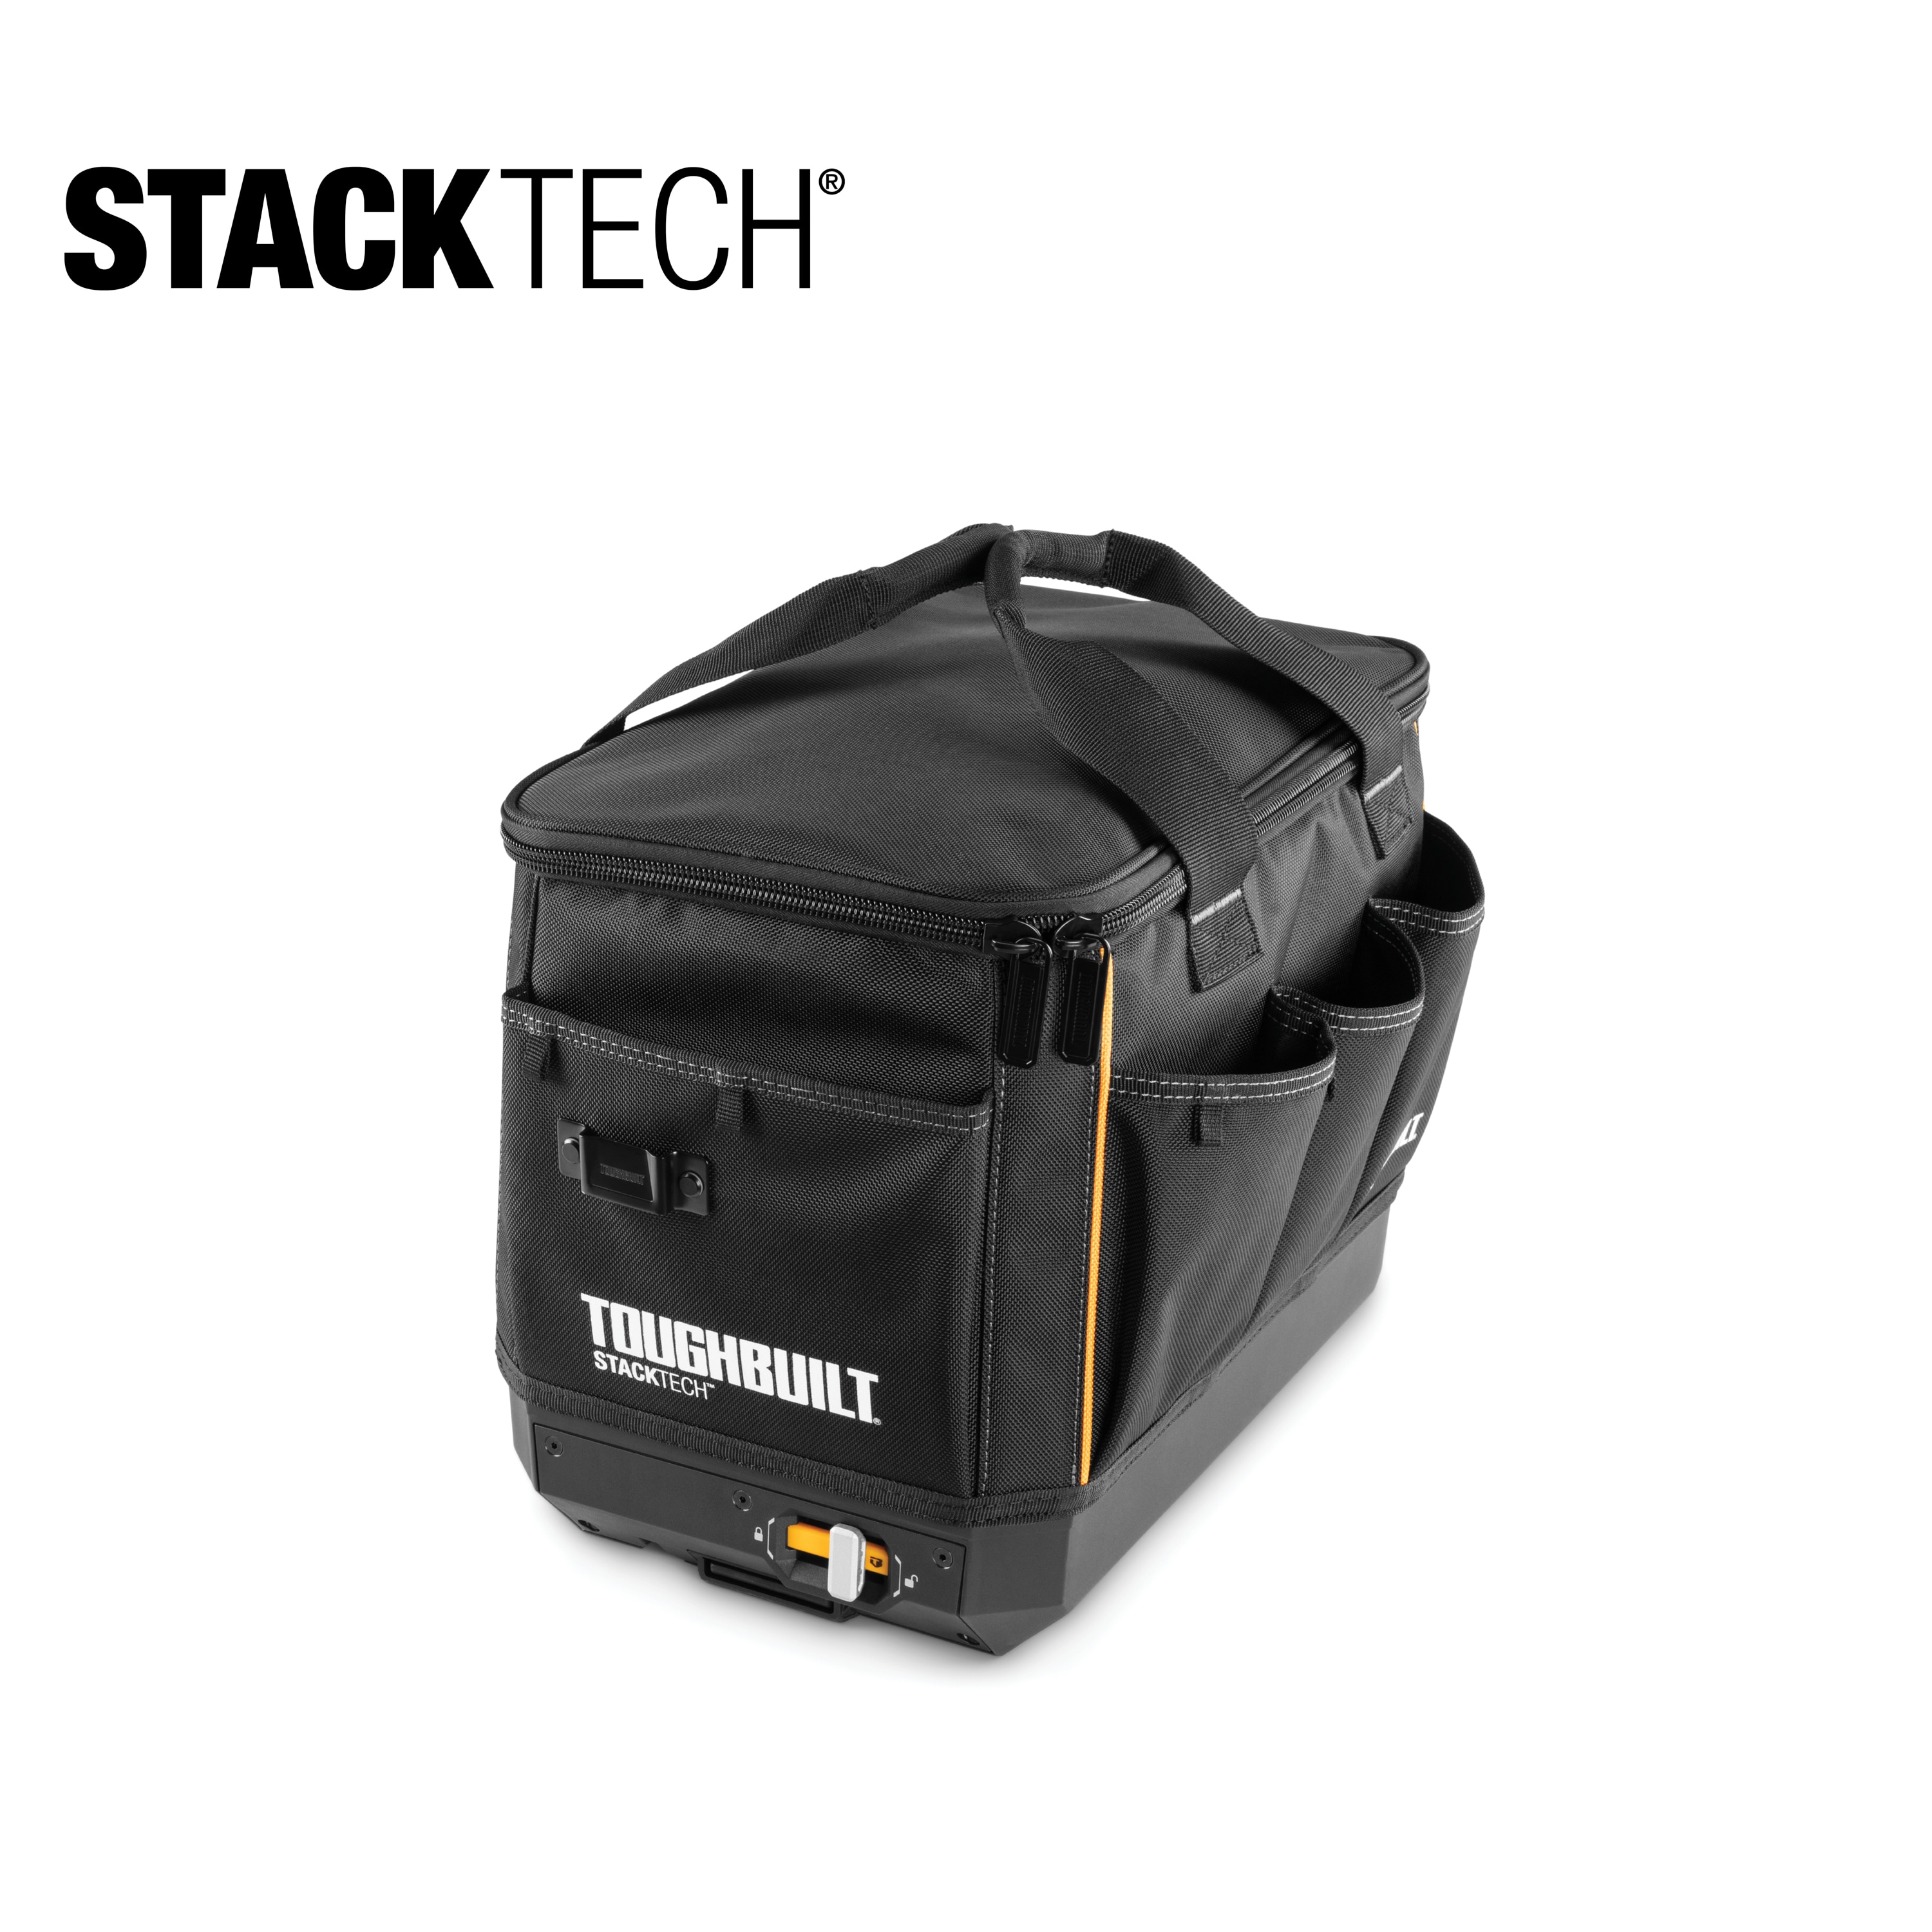 STANLEY FMST83297-1 30 Kg FATMAX PRO-STACK Soft Storage Bag for Easy &  Convenient Storage, 1 Year Warranty, YELLOW & BLACK : Amazon.in: Home  Improvement